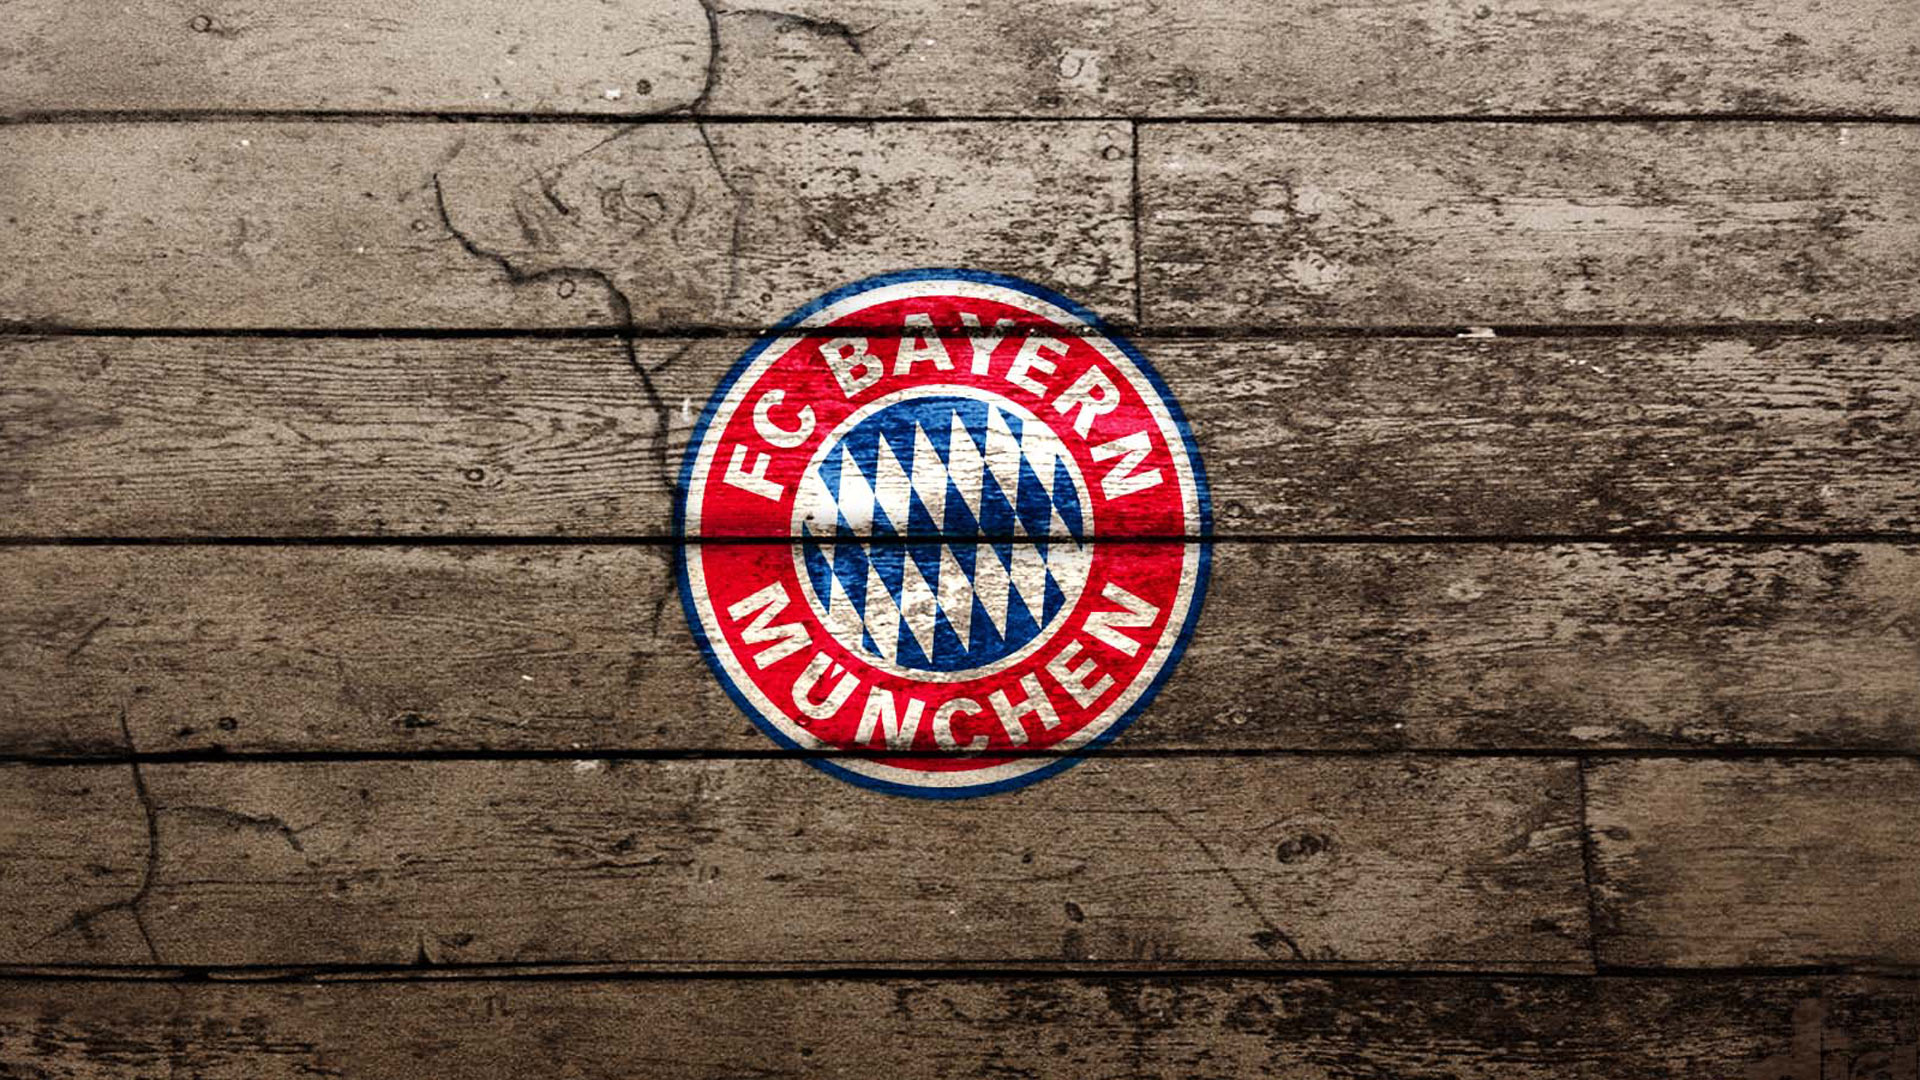 Bayern Munchen Wallpaper For Android